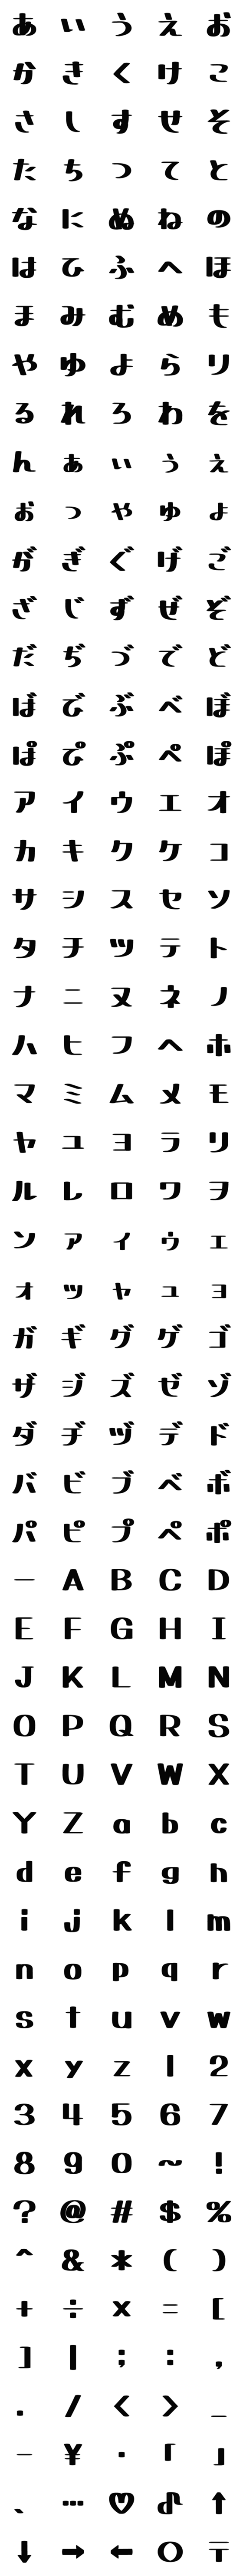 [LINE絵文字]【ボールド カリグラフ】絵文字 デコ文字の画像一覧